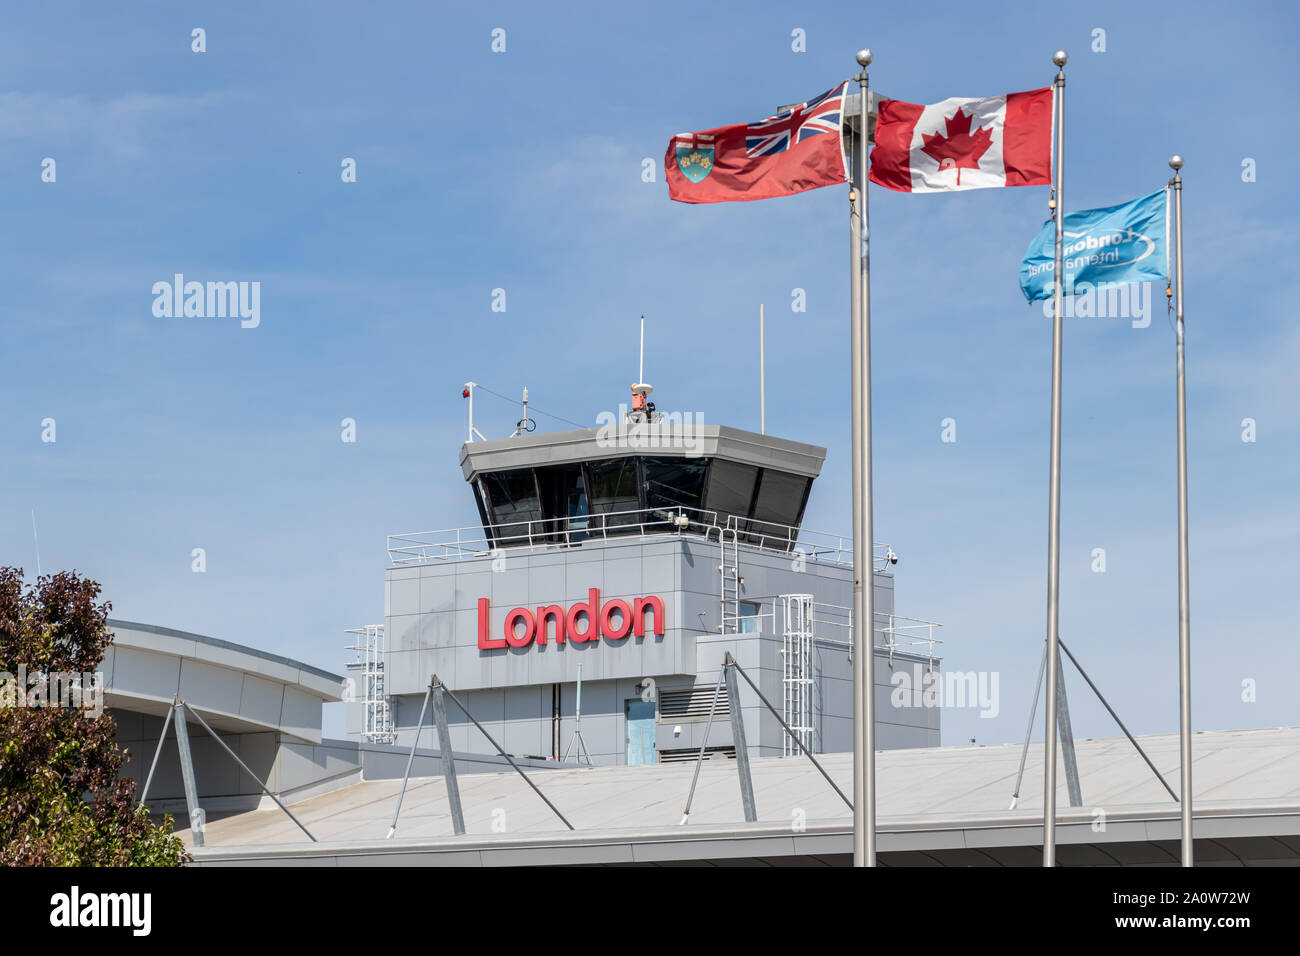 London International Airport, Air Traffic Control Tower above terminal with 'London' sign on it and flags waving in-front. Stock Photo